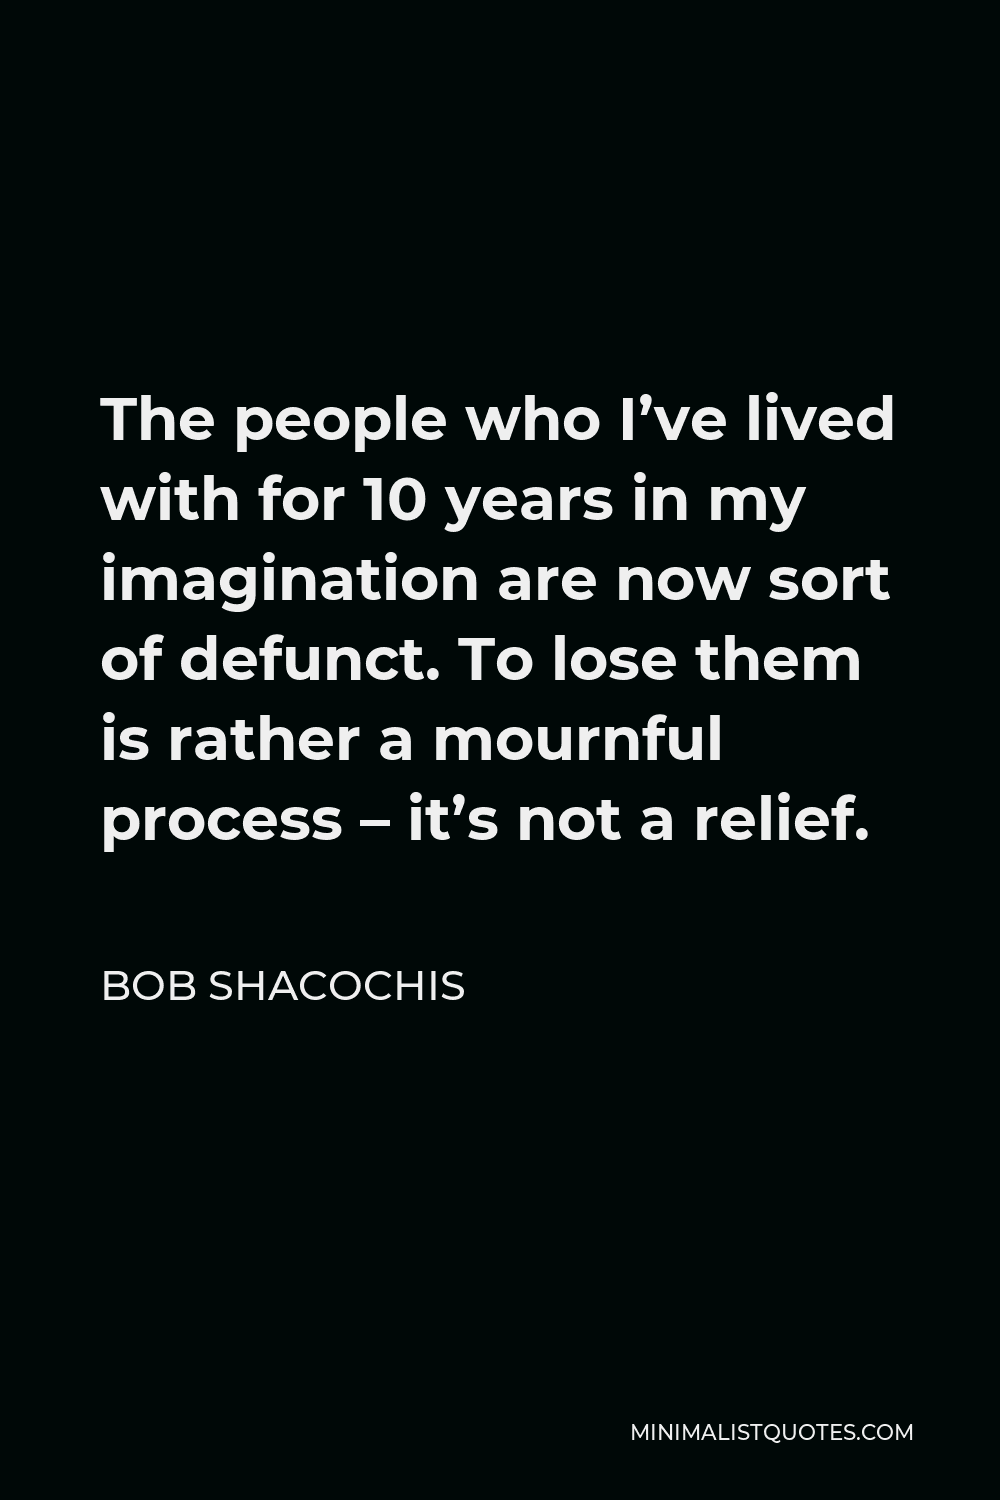 Bob Shacochis Quote - The people who I’ve lived with for 10 years in my imagination are now sort of defunct. To lose them is rather a mournful process – it’s not a relief.